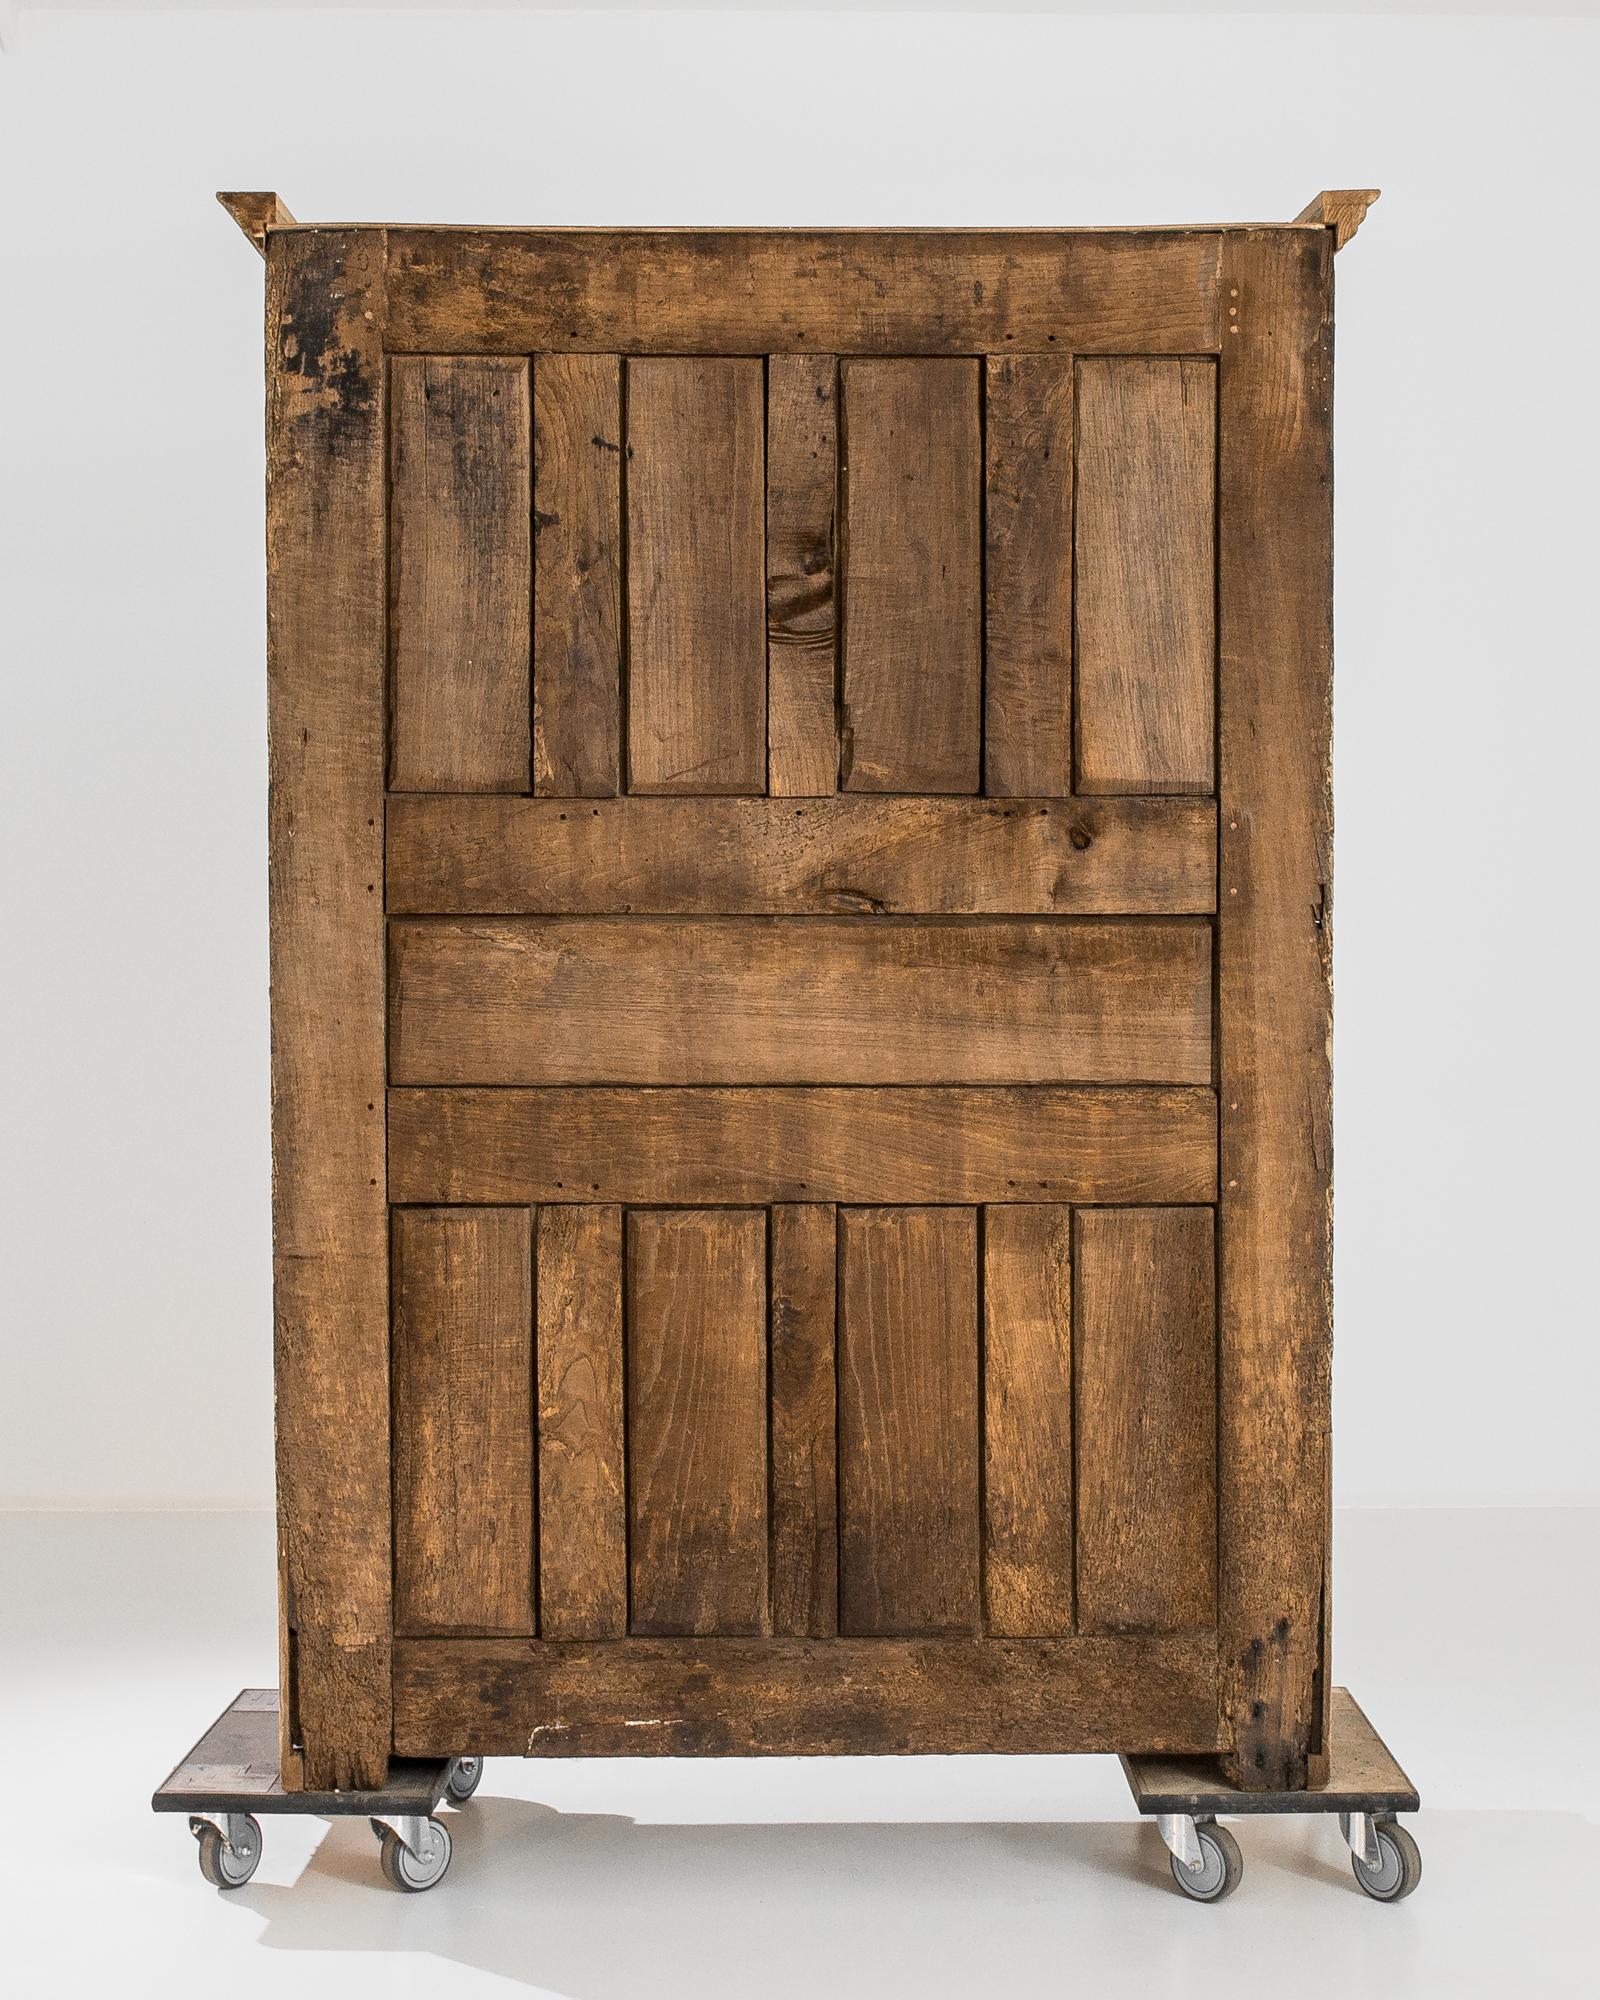 A bleached oak cabinet from France, produced circa 1800. An expertly crafted antique from the epoch that spawned the French empire, featuring a three shelf cabinet behind locking double doors. With a cornice like the wings of an omega, this stately